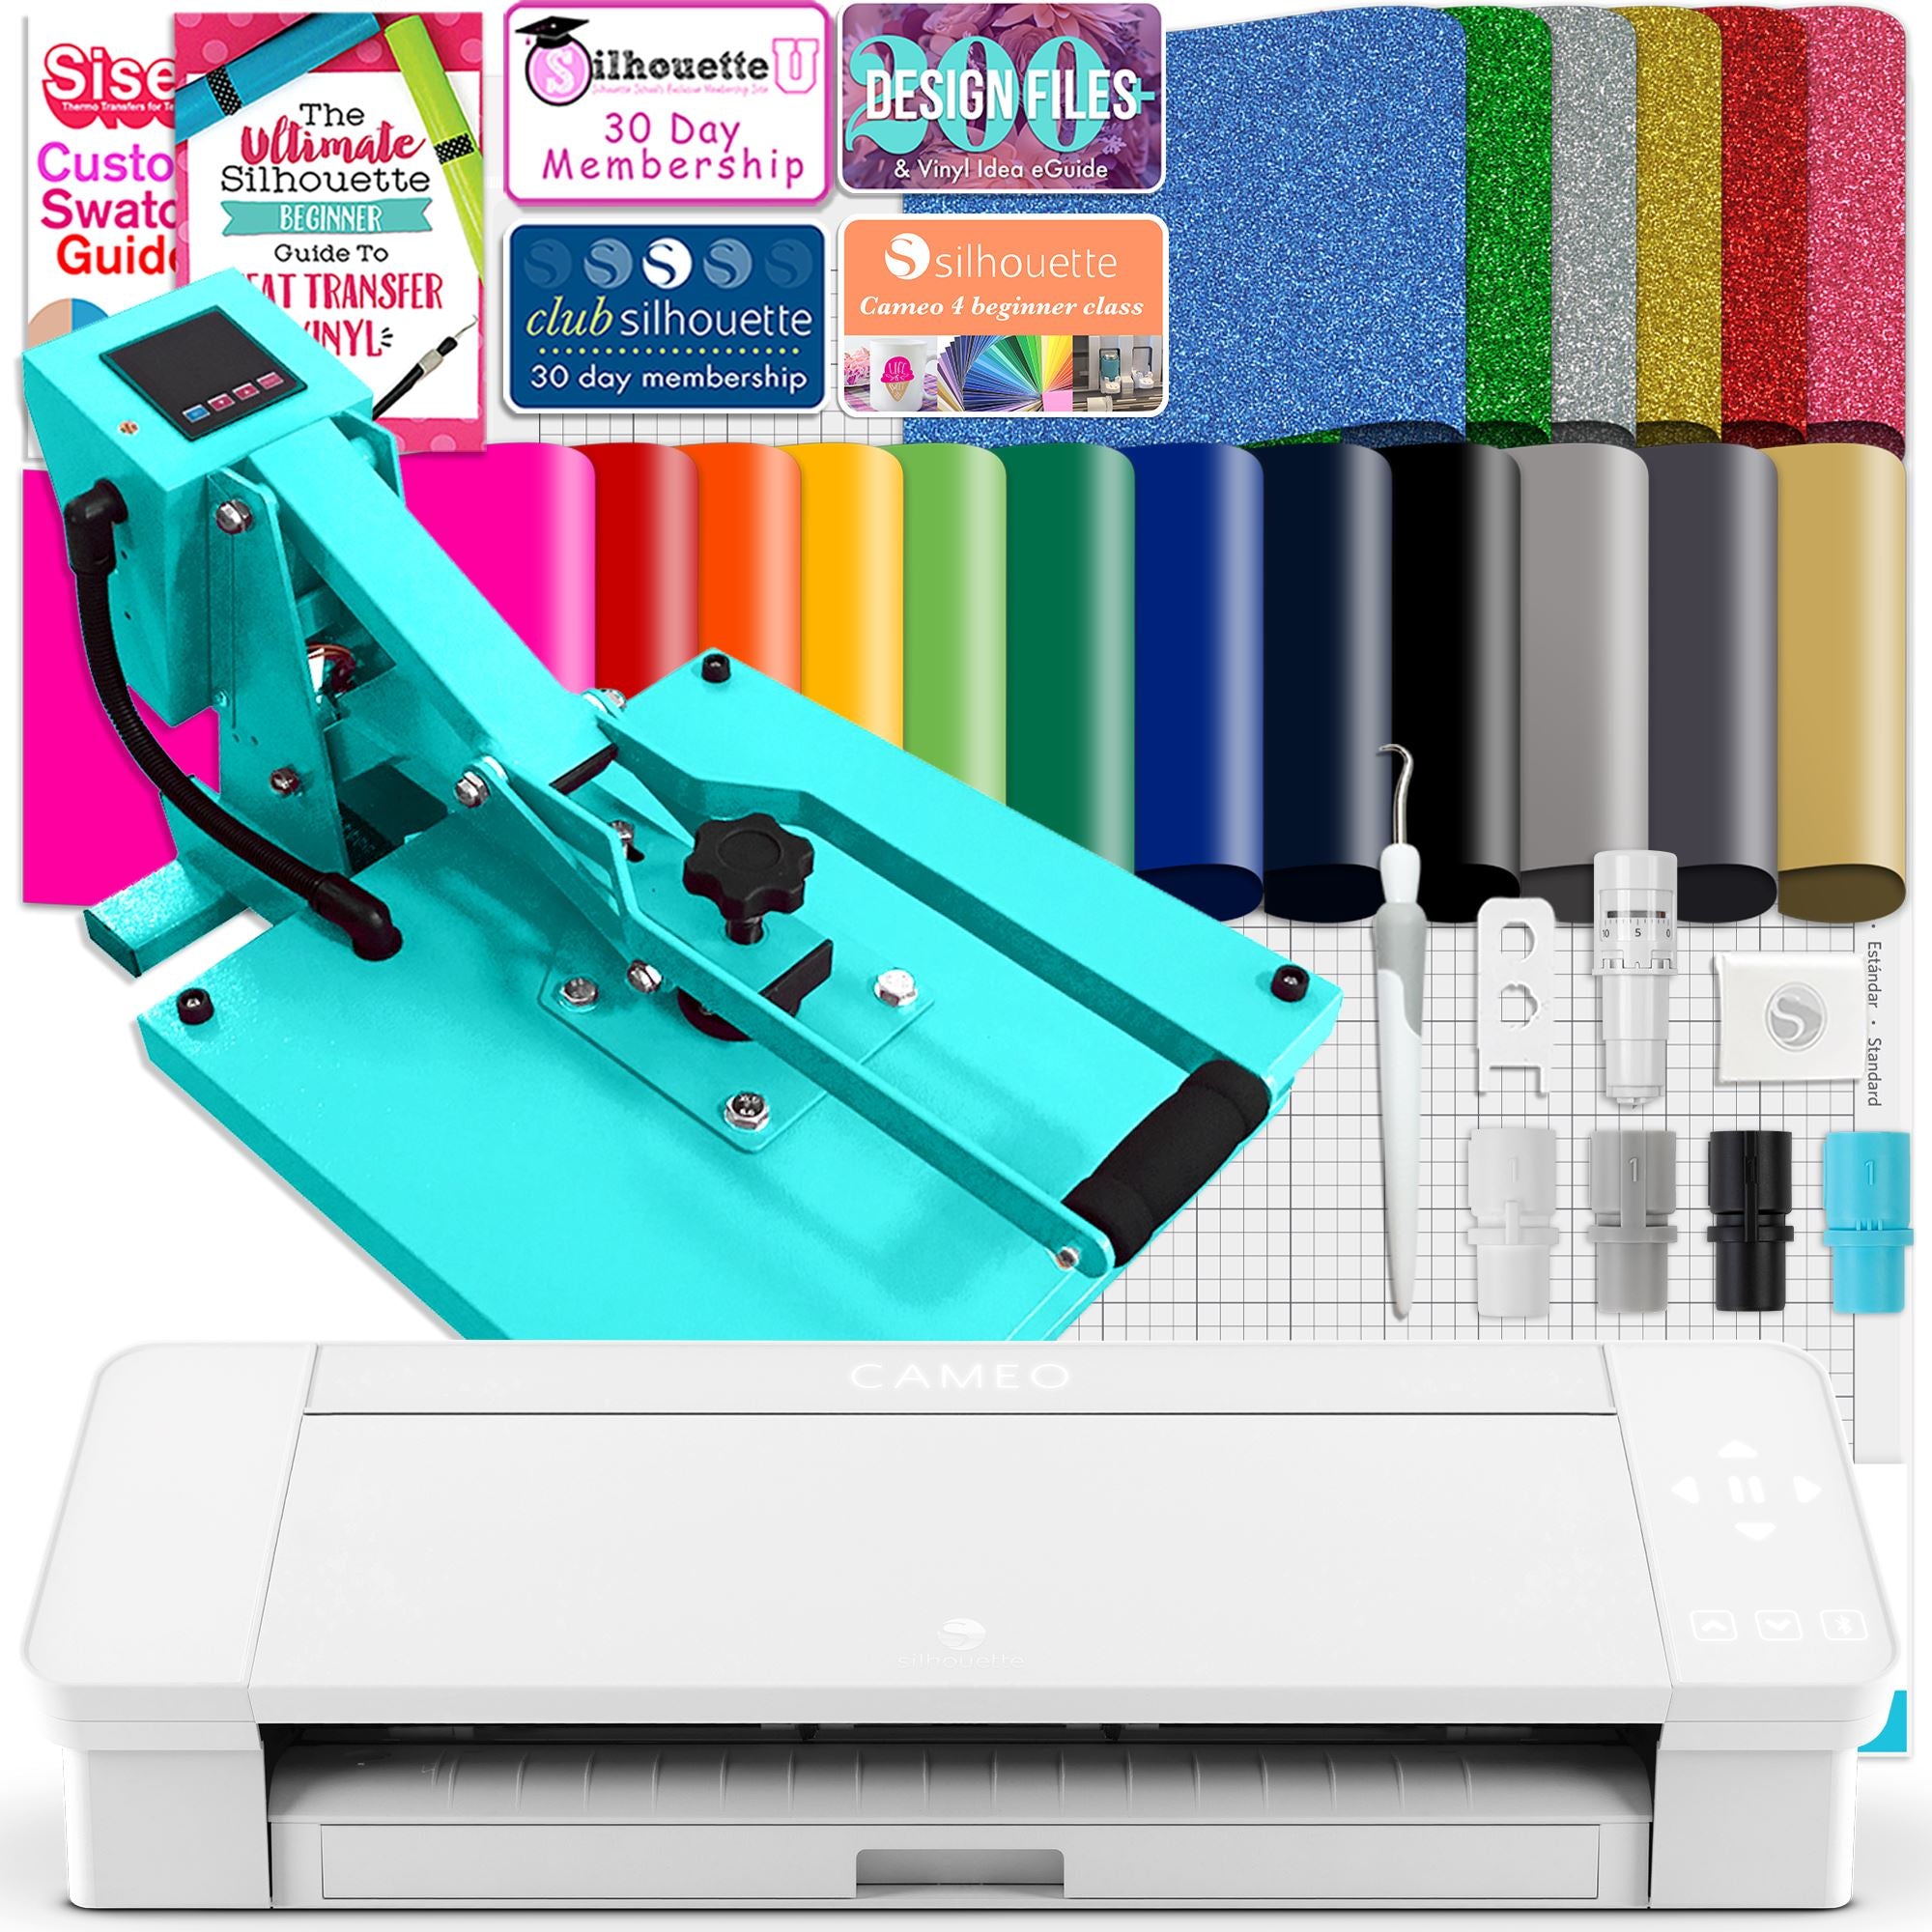 Silhouette Craft Machines Up To 40% Off at Woot :: Southern Savers